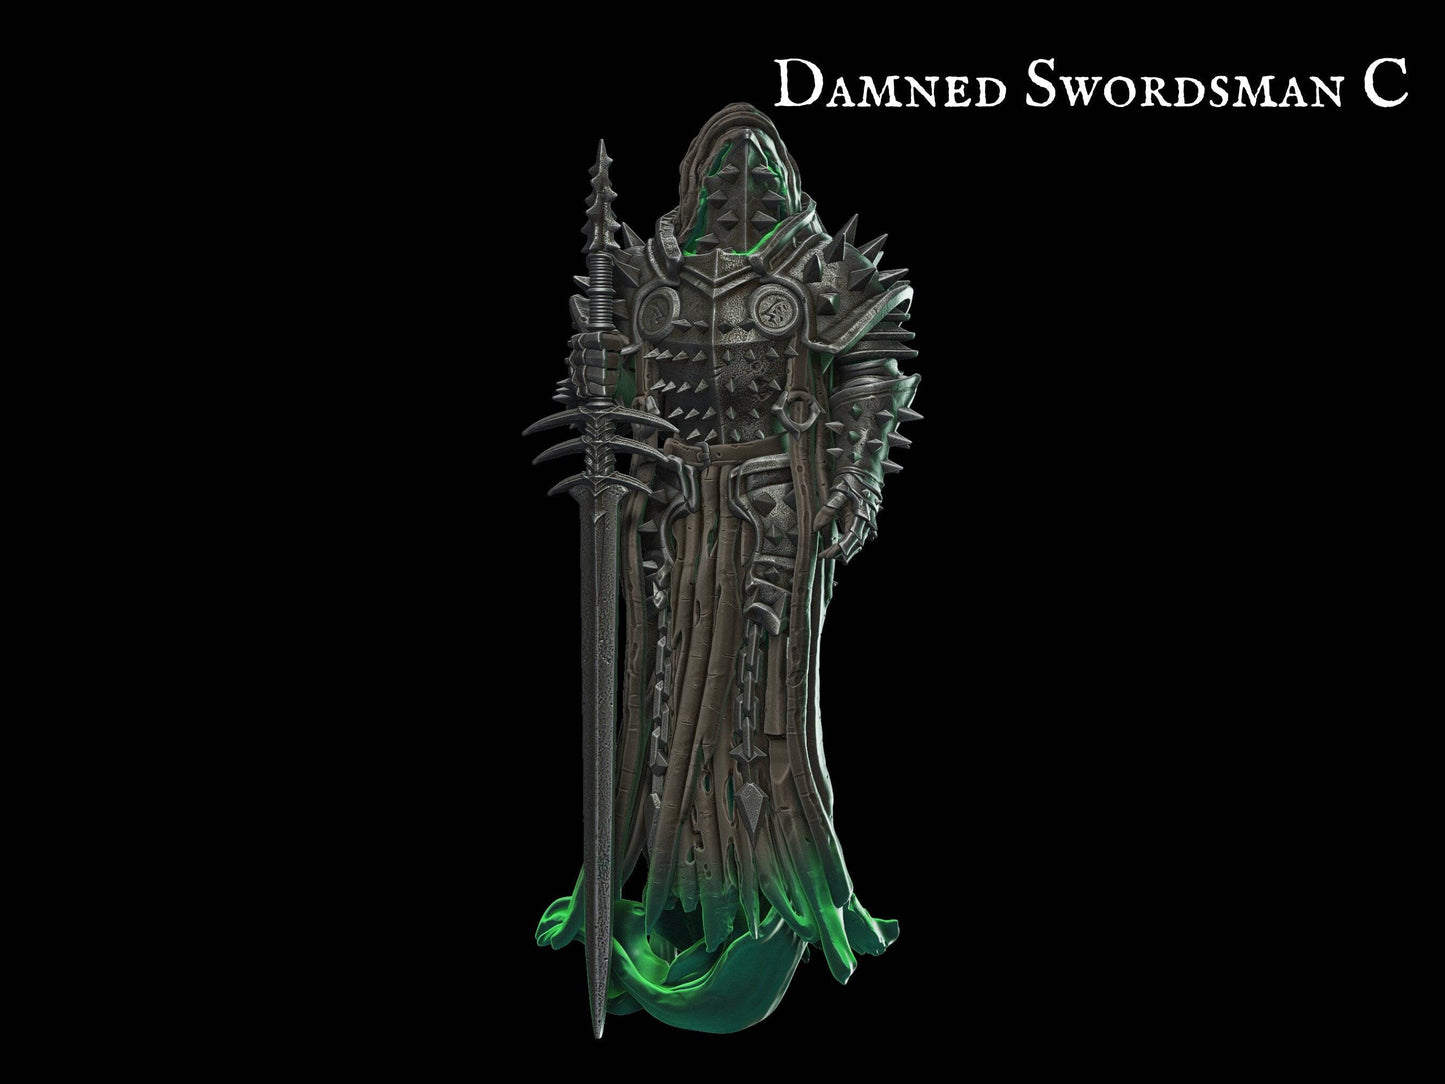 Undead Miniature Warrior Miniature 28mm scale Tabletop gaming DnD Miniature Dungeons and Dragons, dnd 5e dungeon master gift dnd sword - Plague Miniatures shop for DnD Miniatures